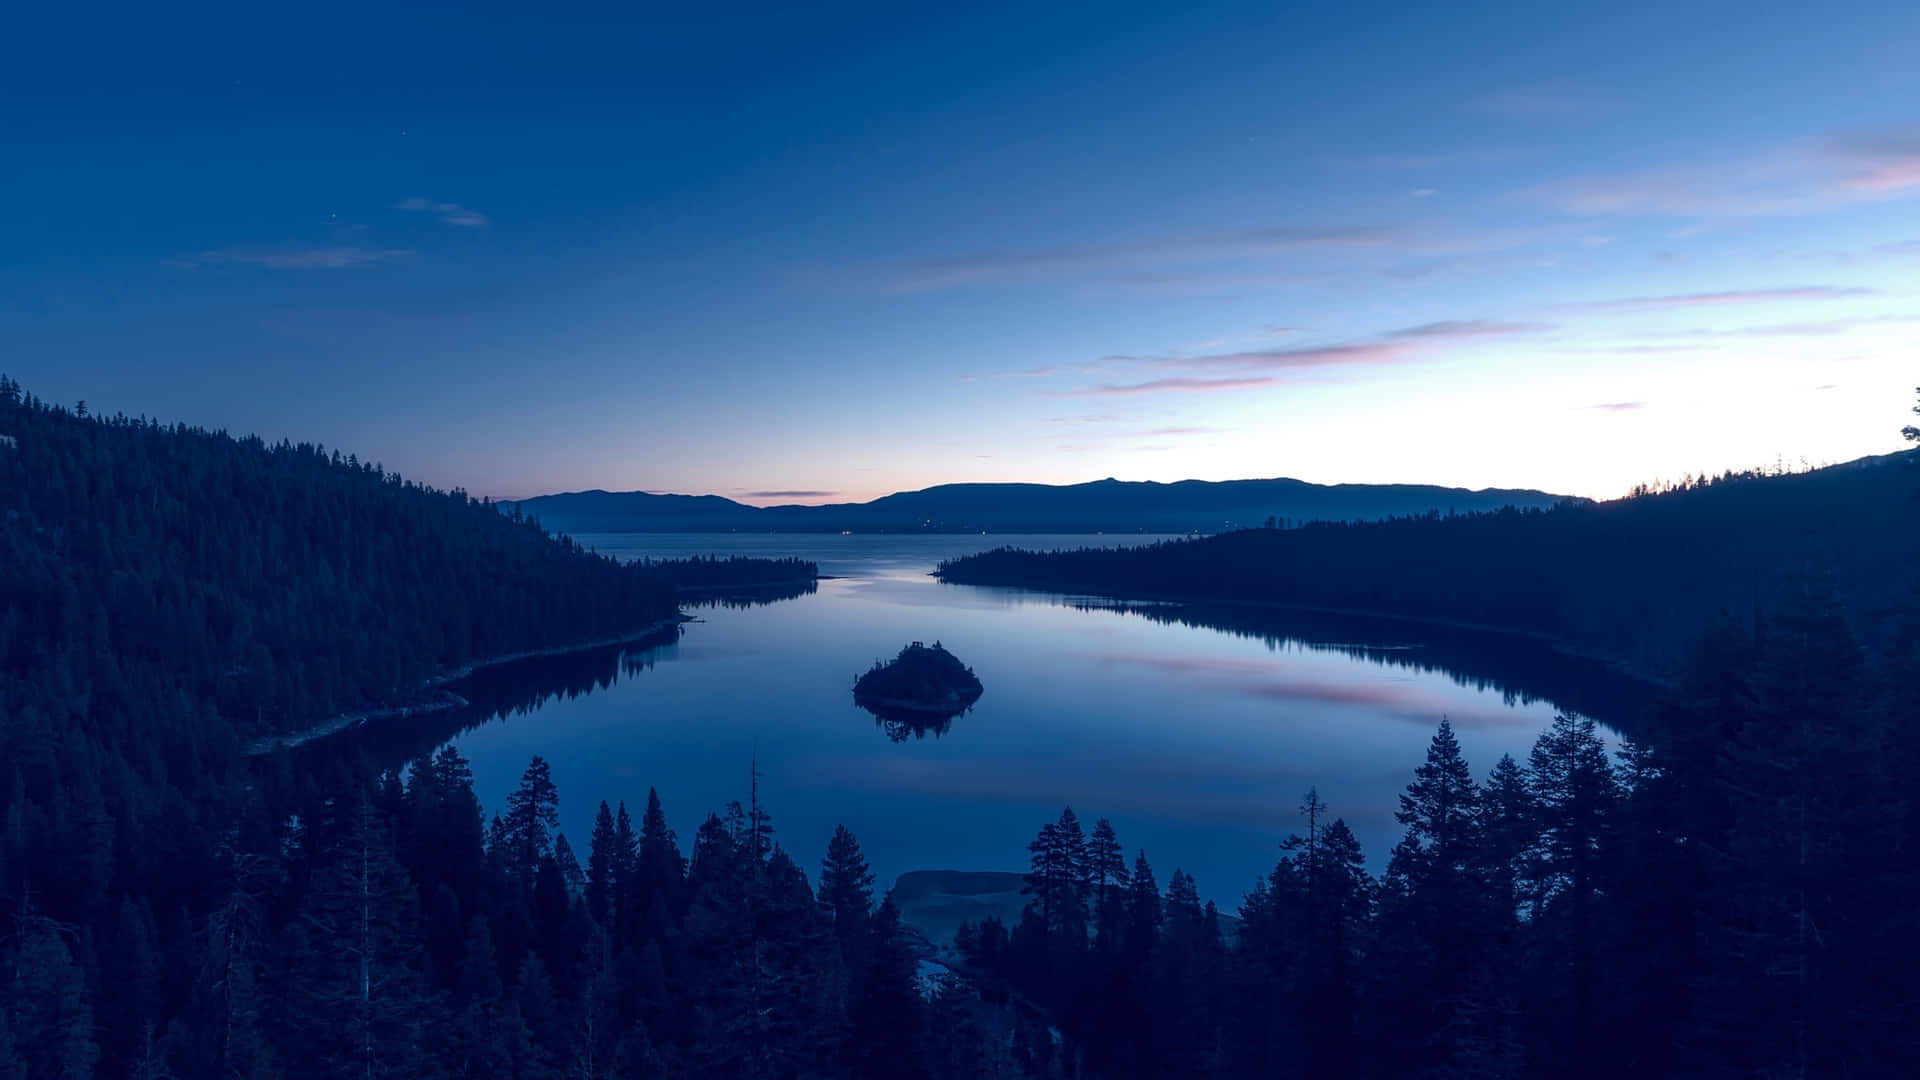 Feel the serenity of Lake Tahoe in 4k high definition Wallpaper